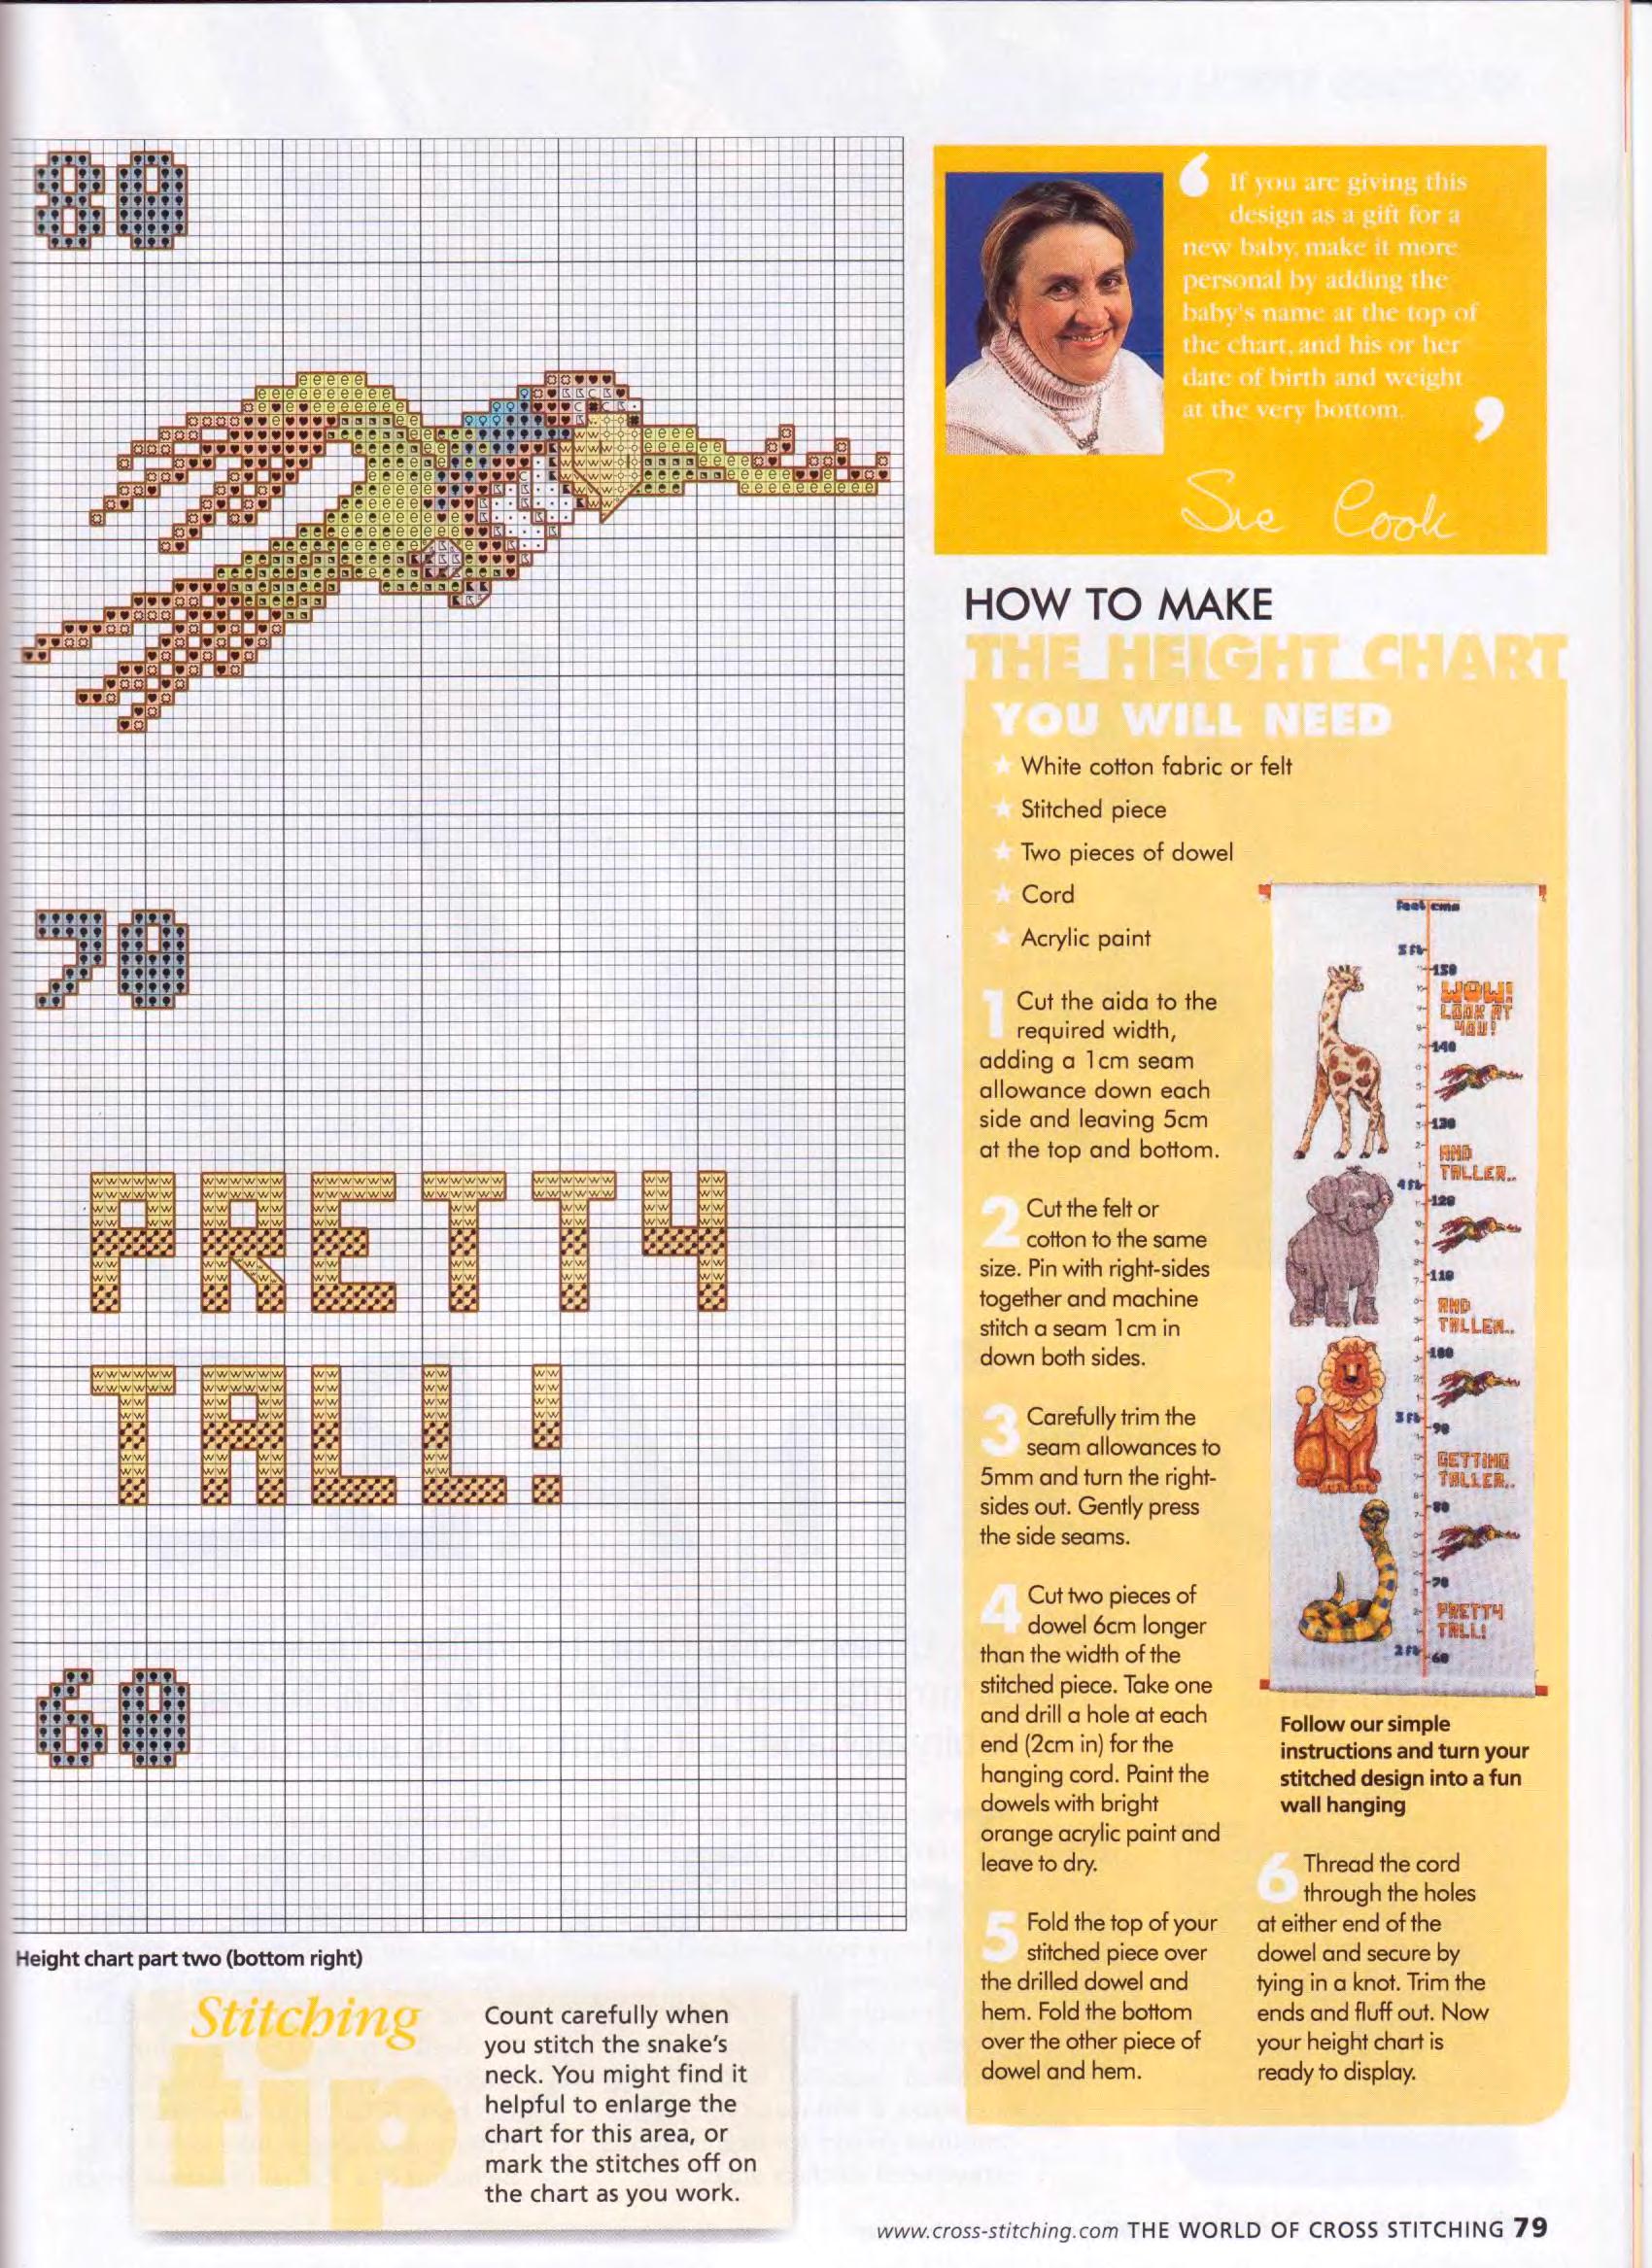 Height chart with jungle animals (6)